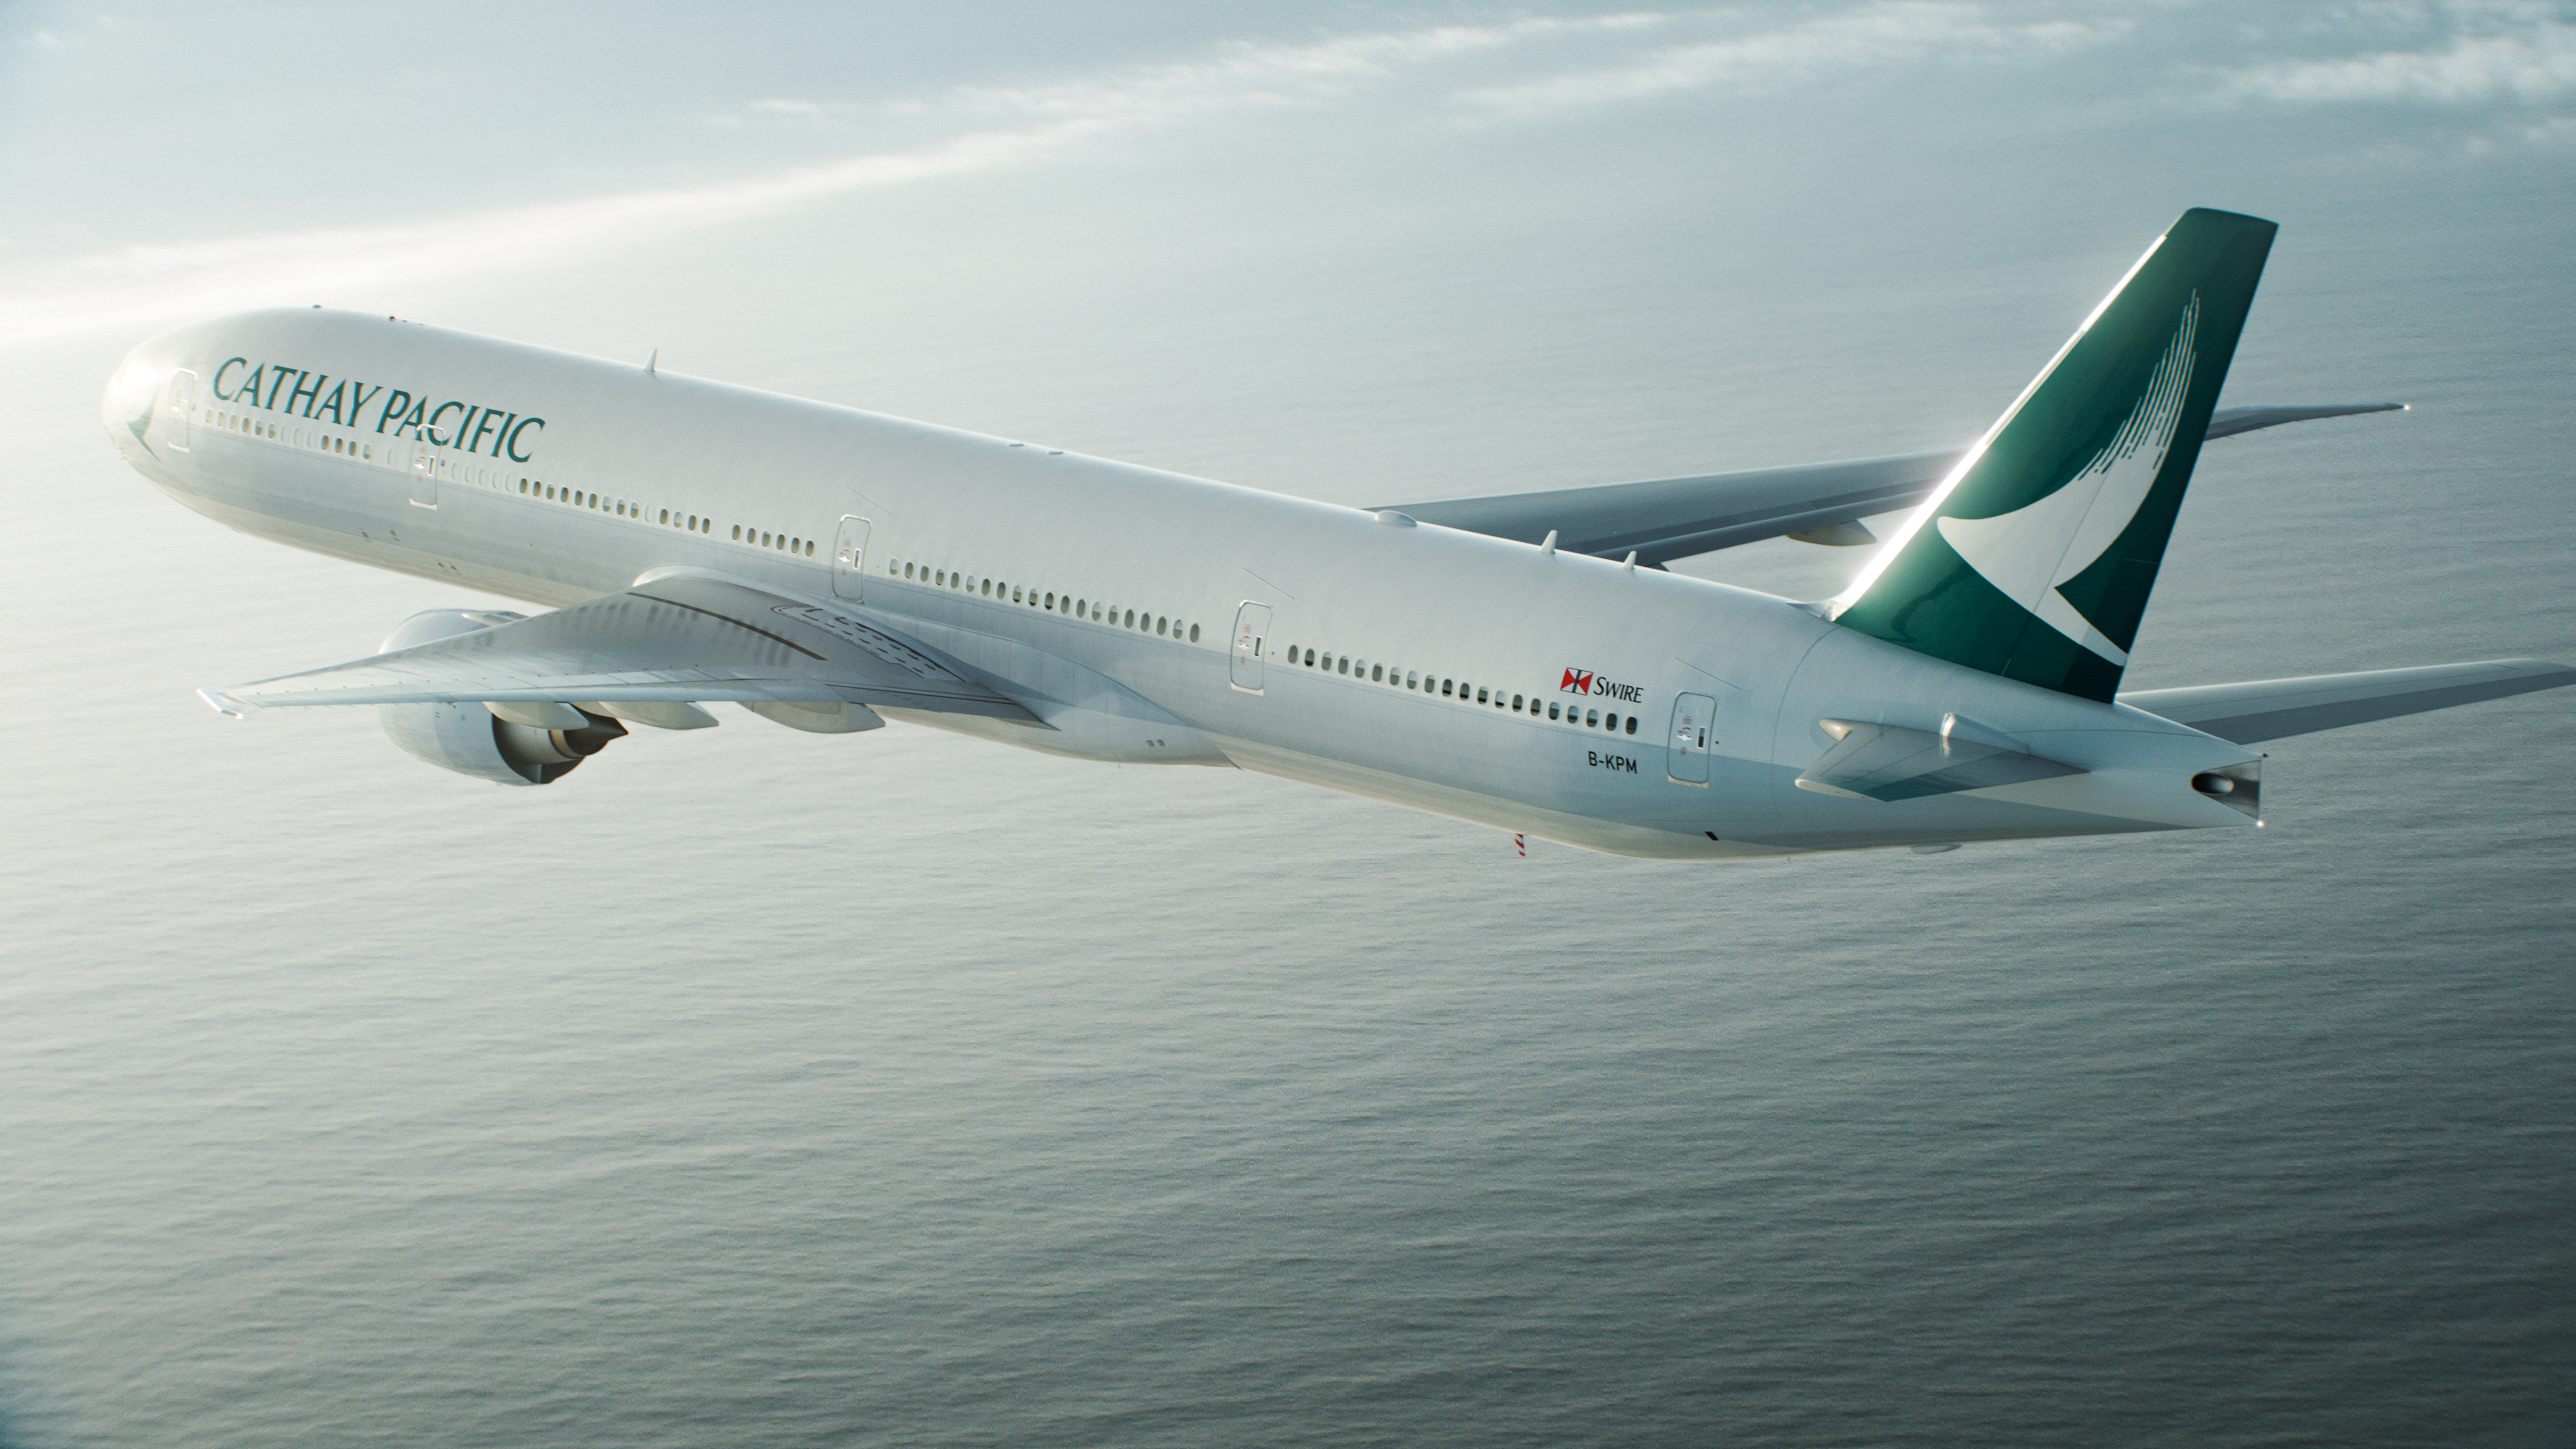 Cathay Pacific Reveal New Livery To Match New Brand | TheDesignAir